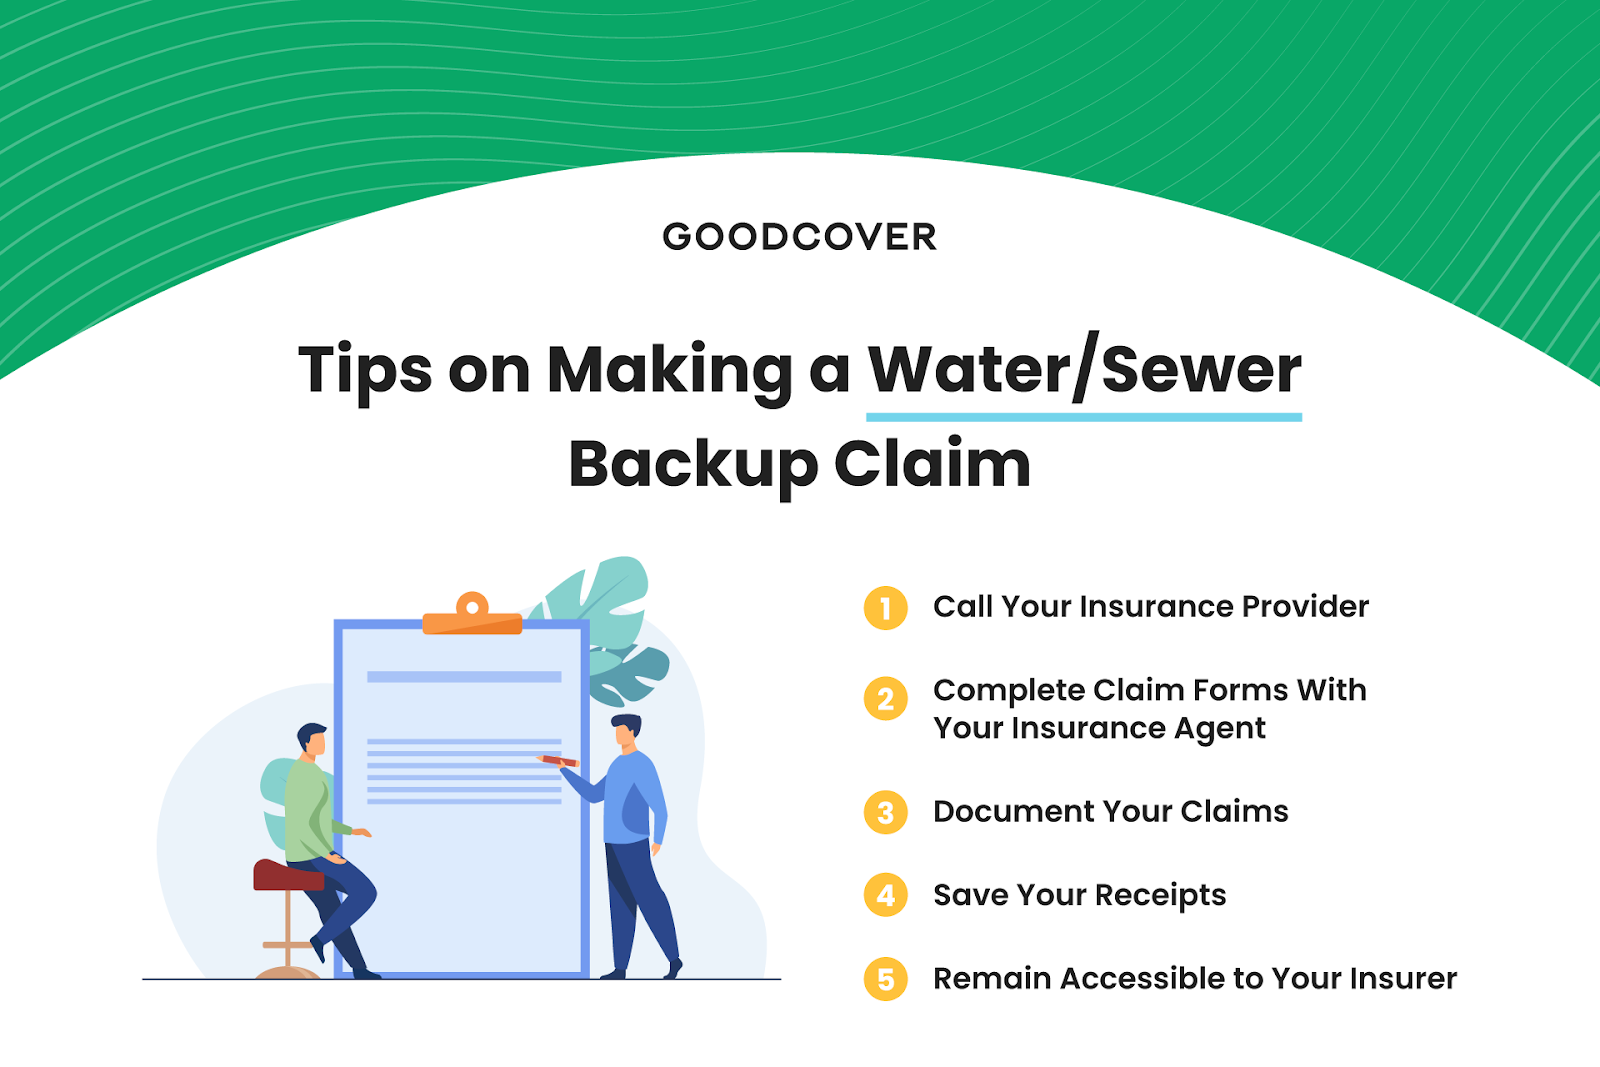 Tips on Making a Water/Sewer Backup Claim